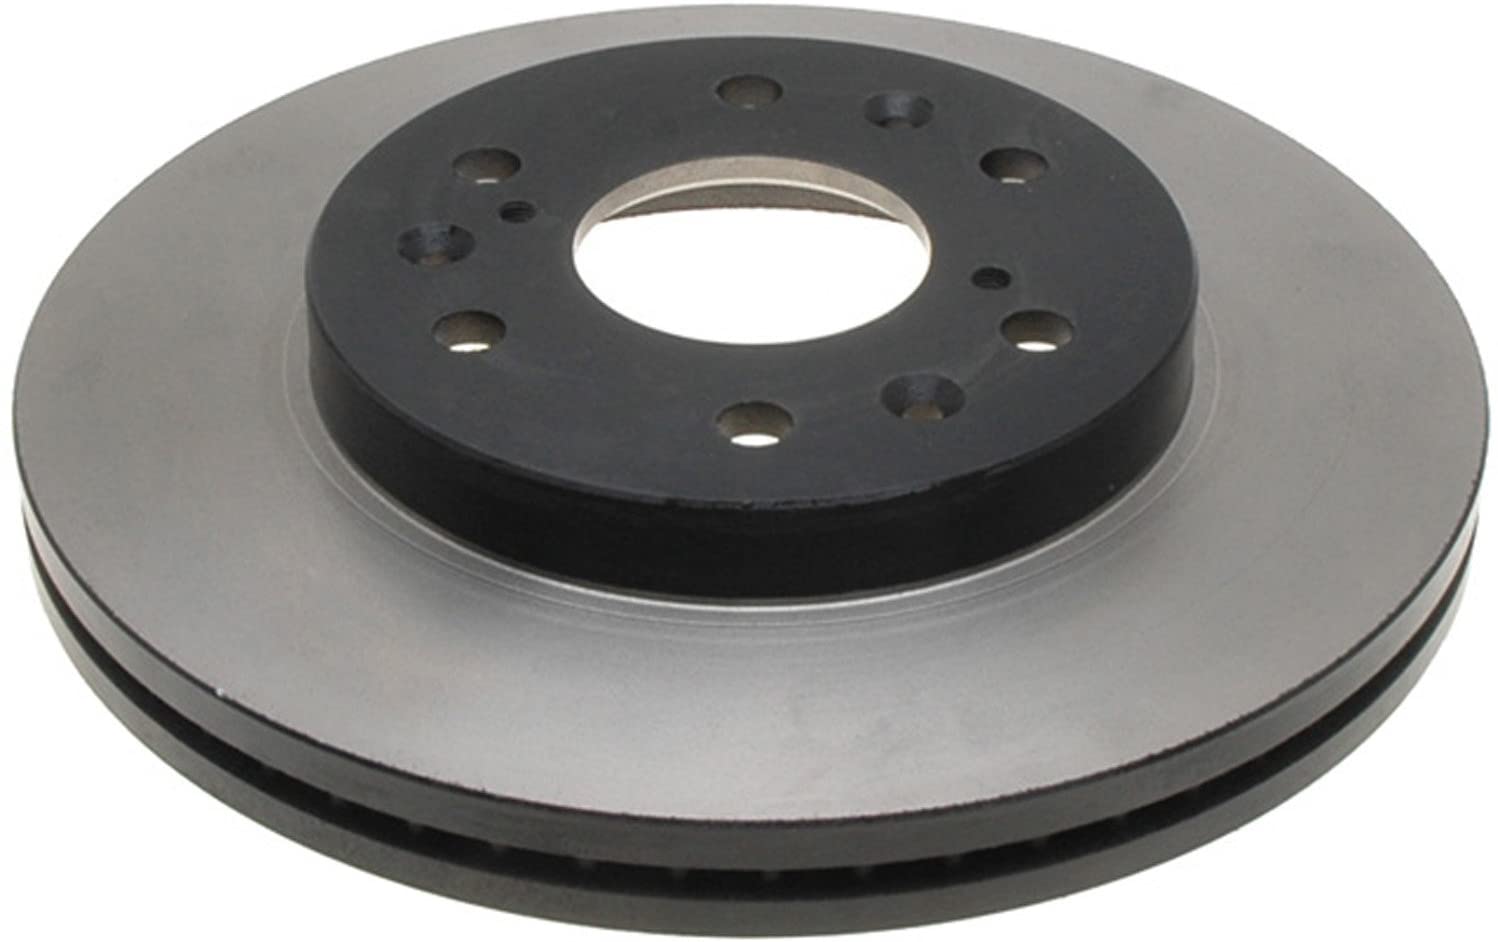 3 reasons why the professional brake rotors are ideal for your vehicle